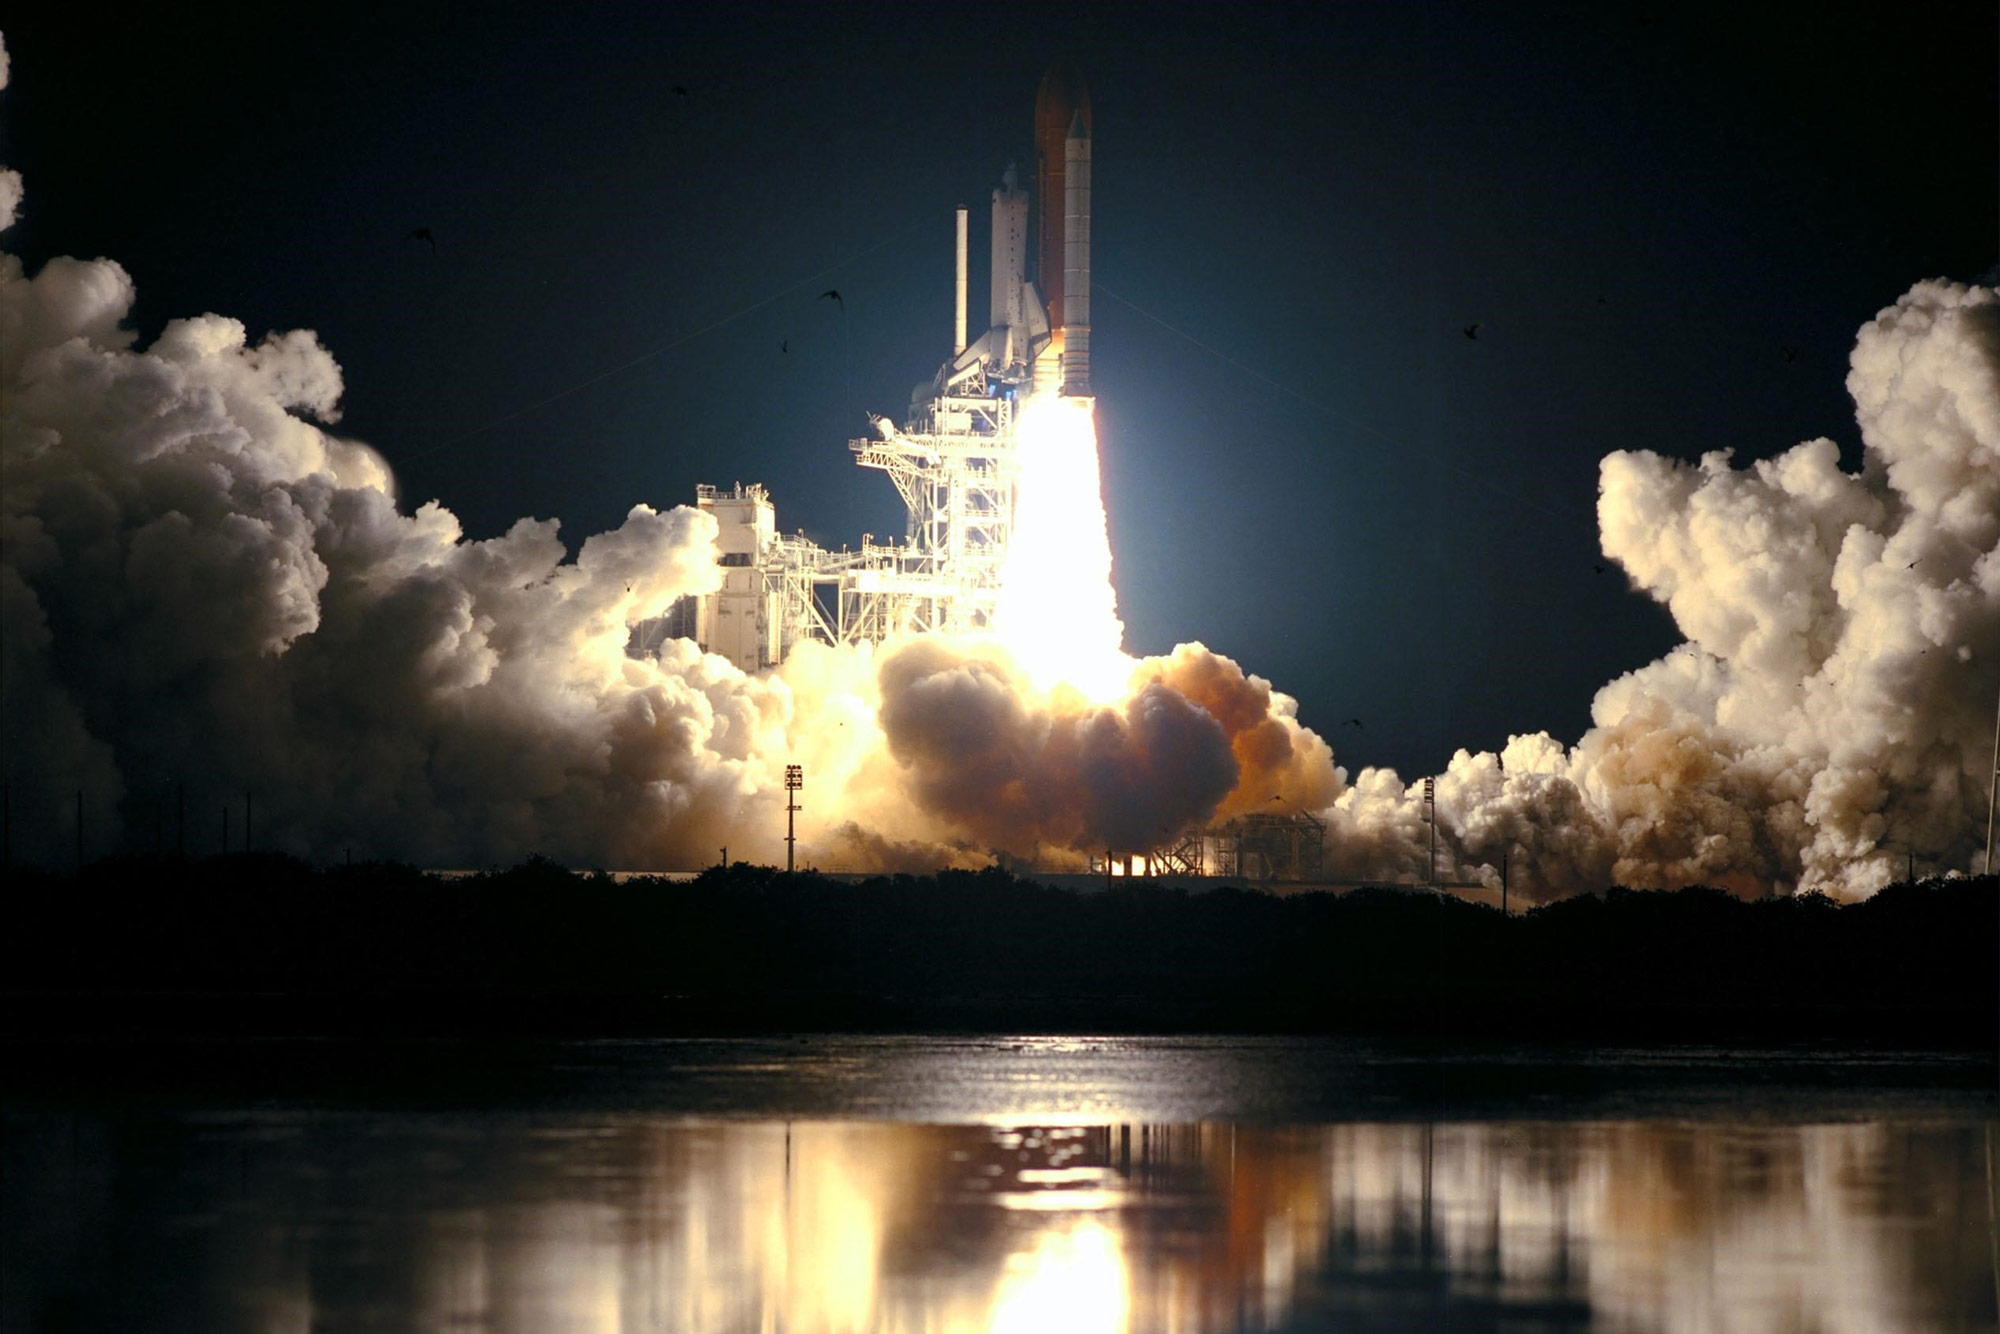 Image of the Space Shuttle launching